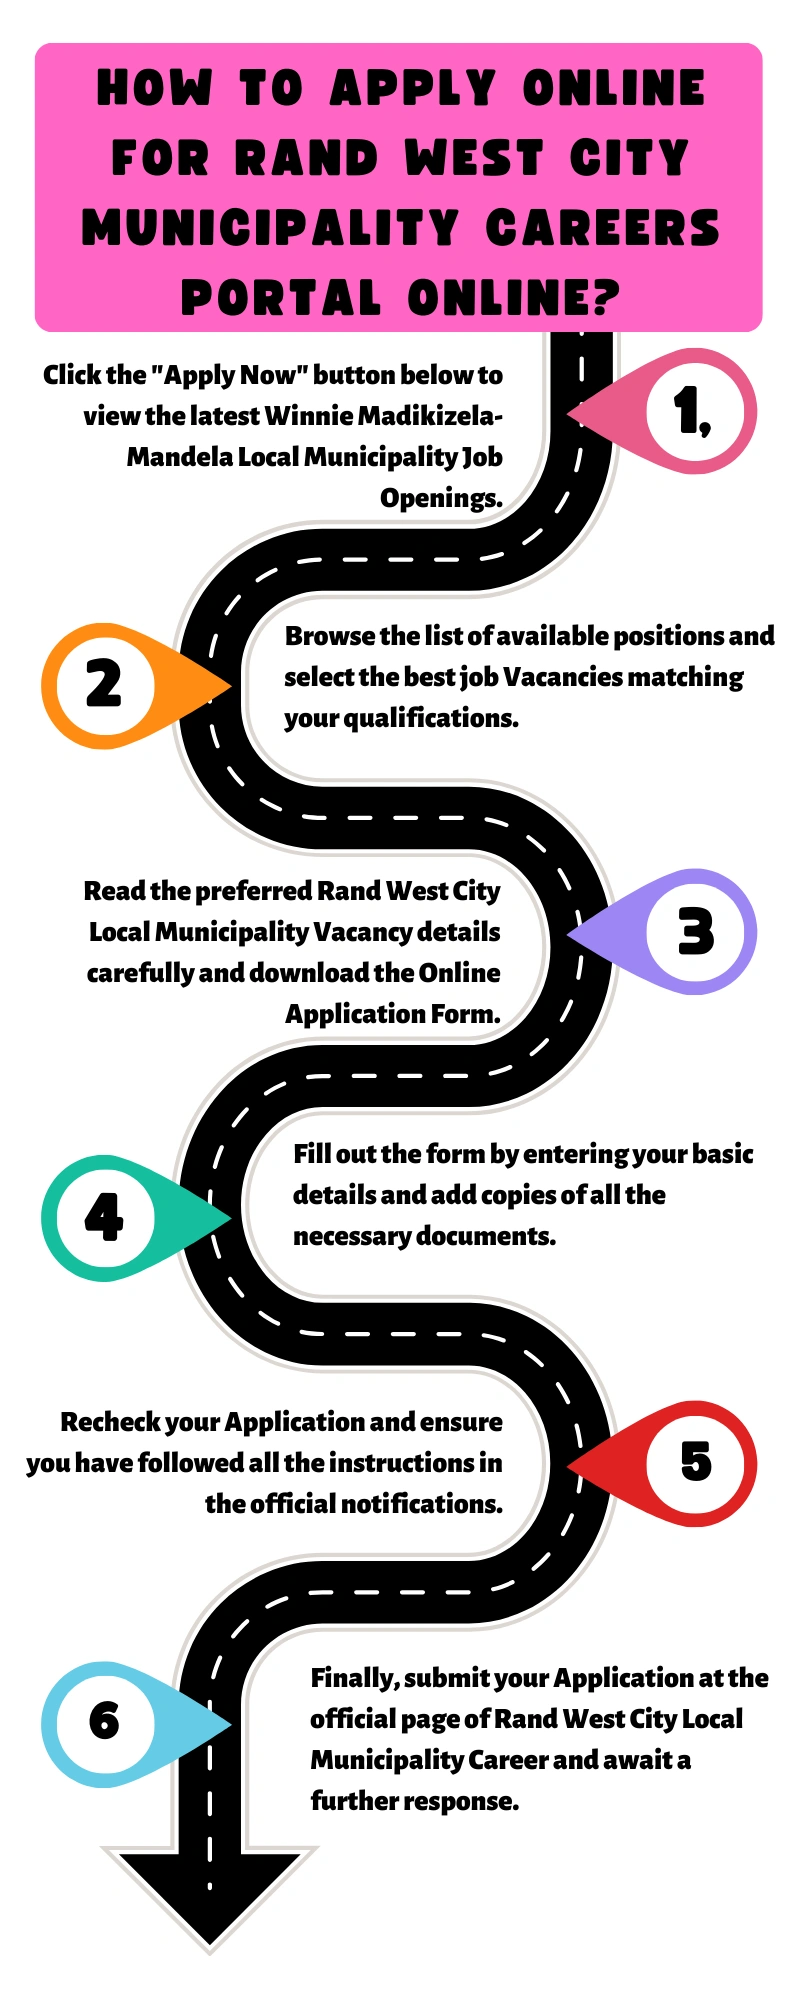 How to Apply Online for Rand West City Municipality Careers Portal Online?